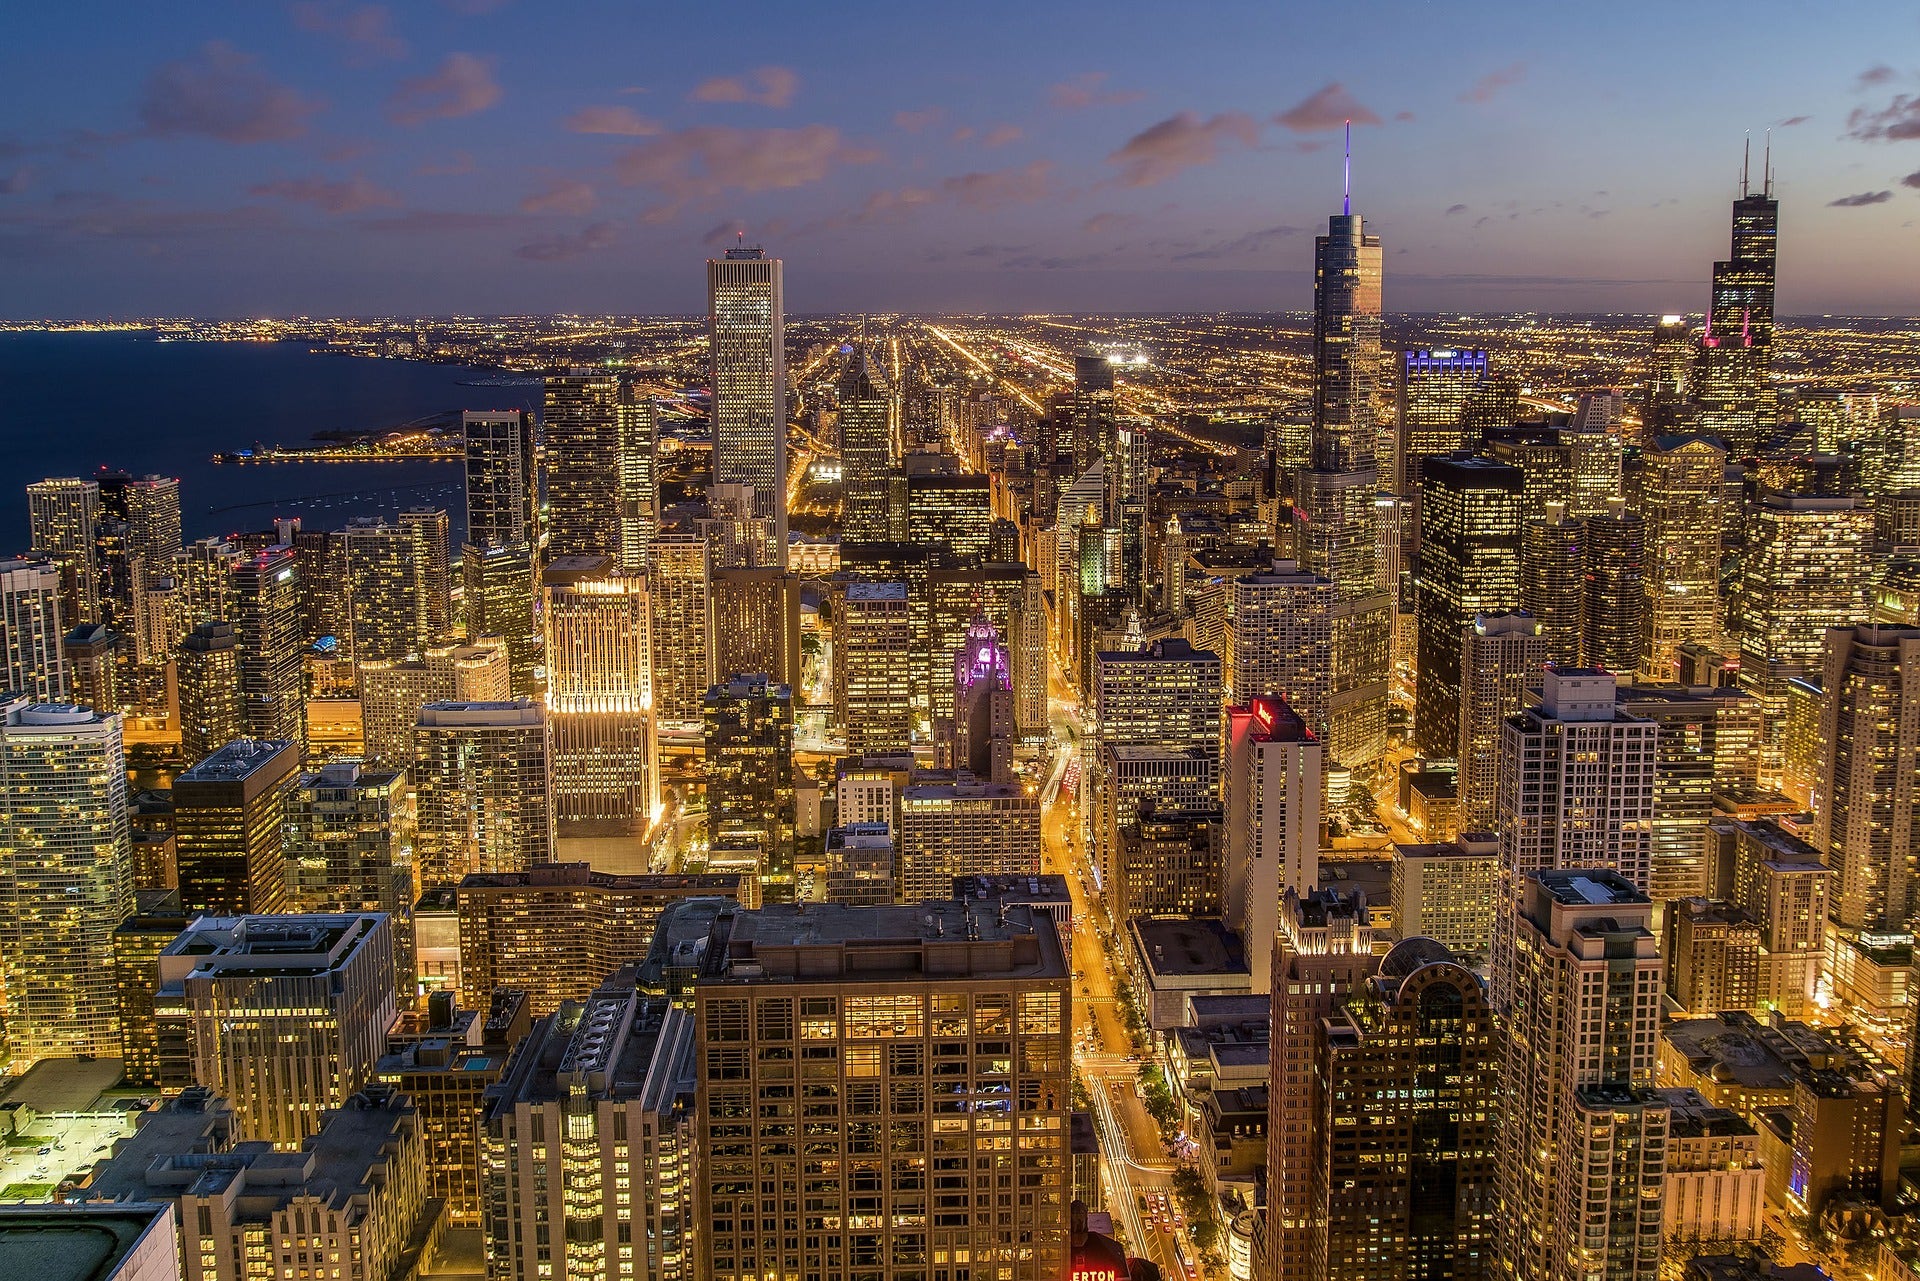 4 Lending Platforms Taking Chicago By Storm